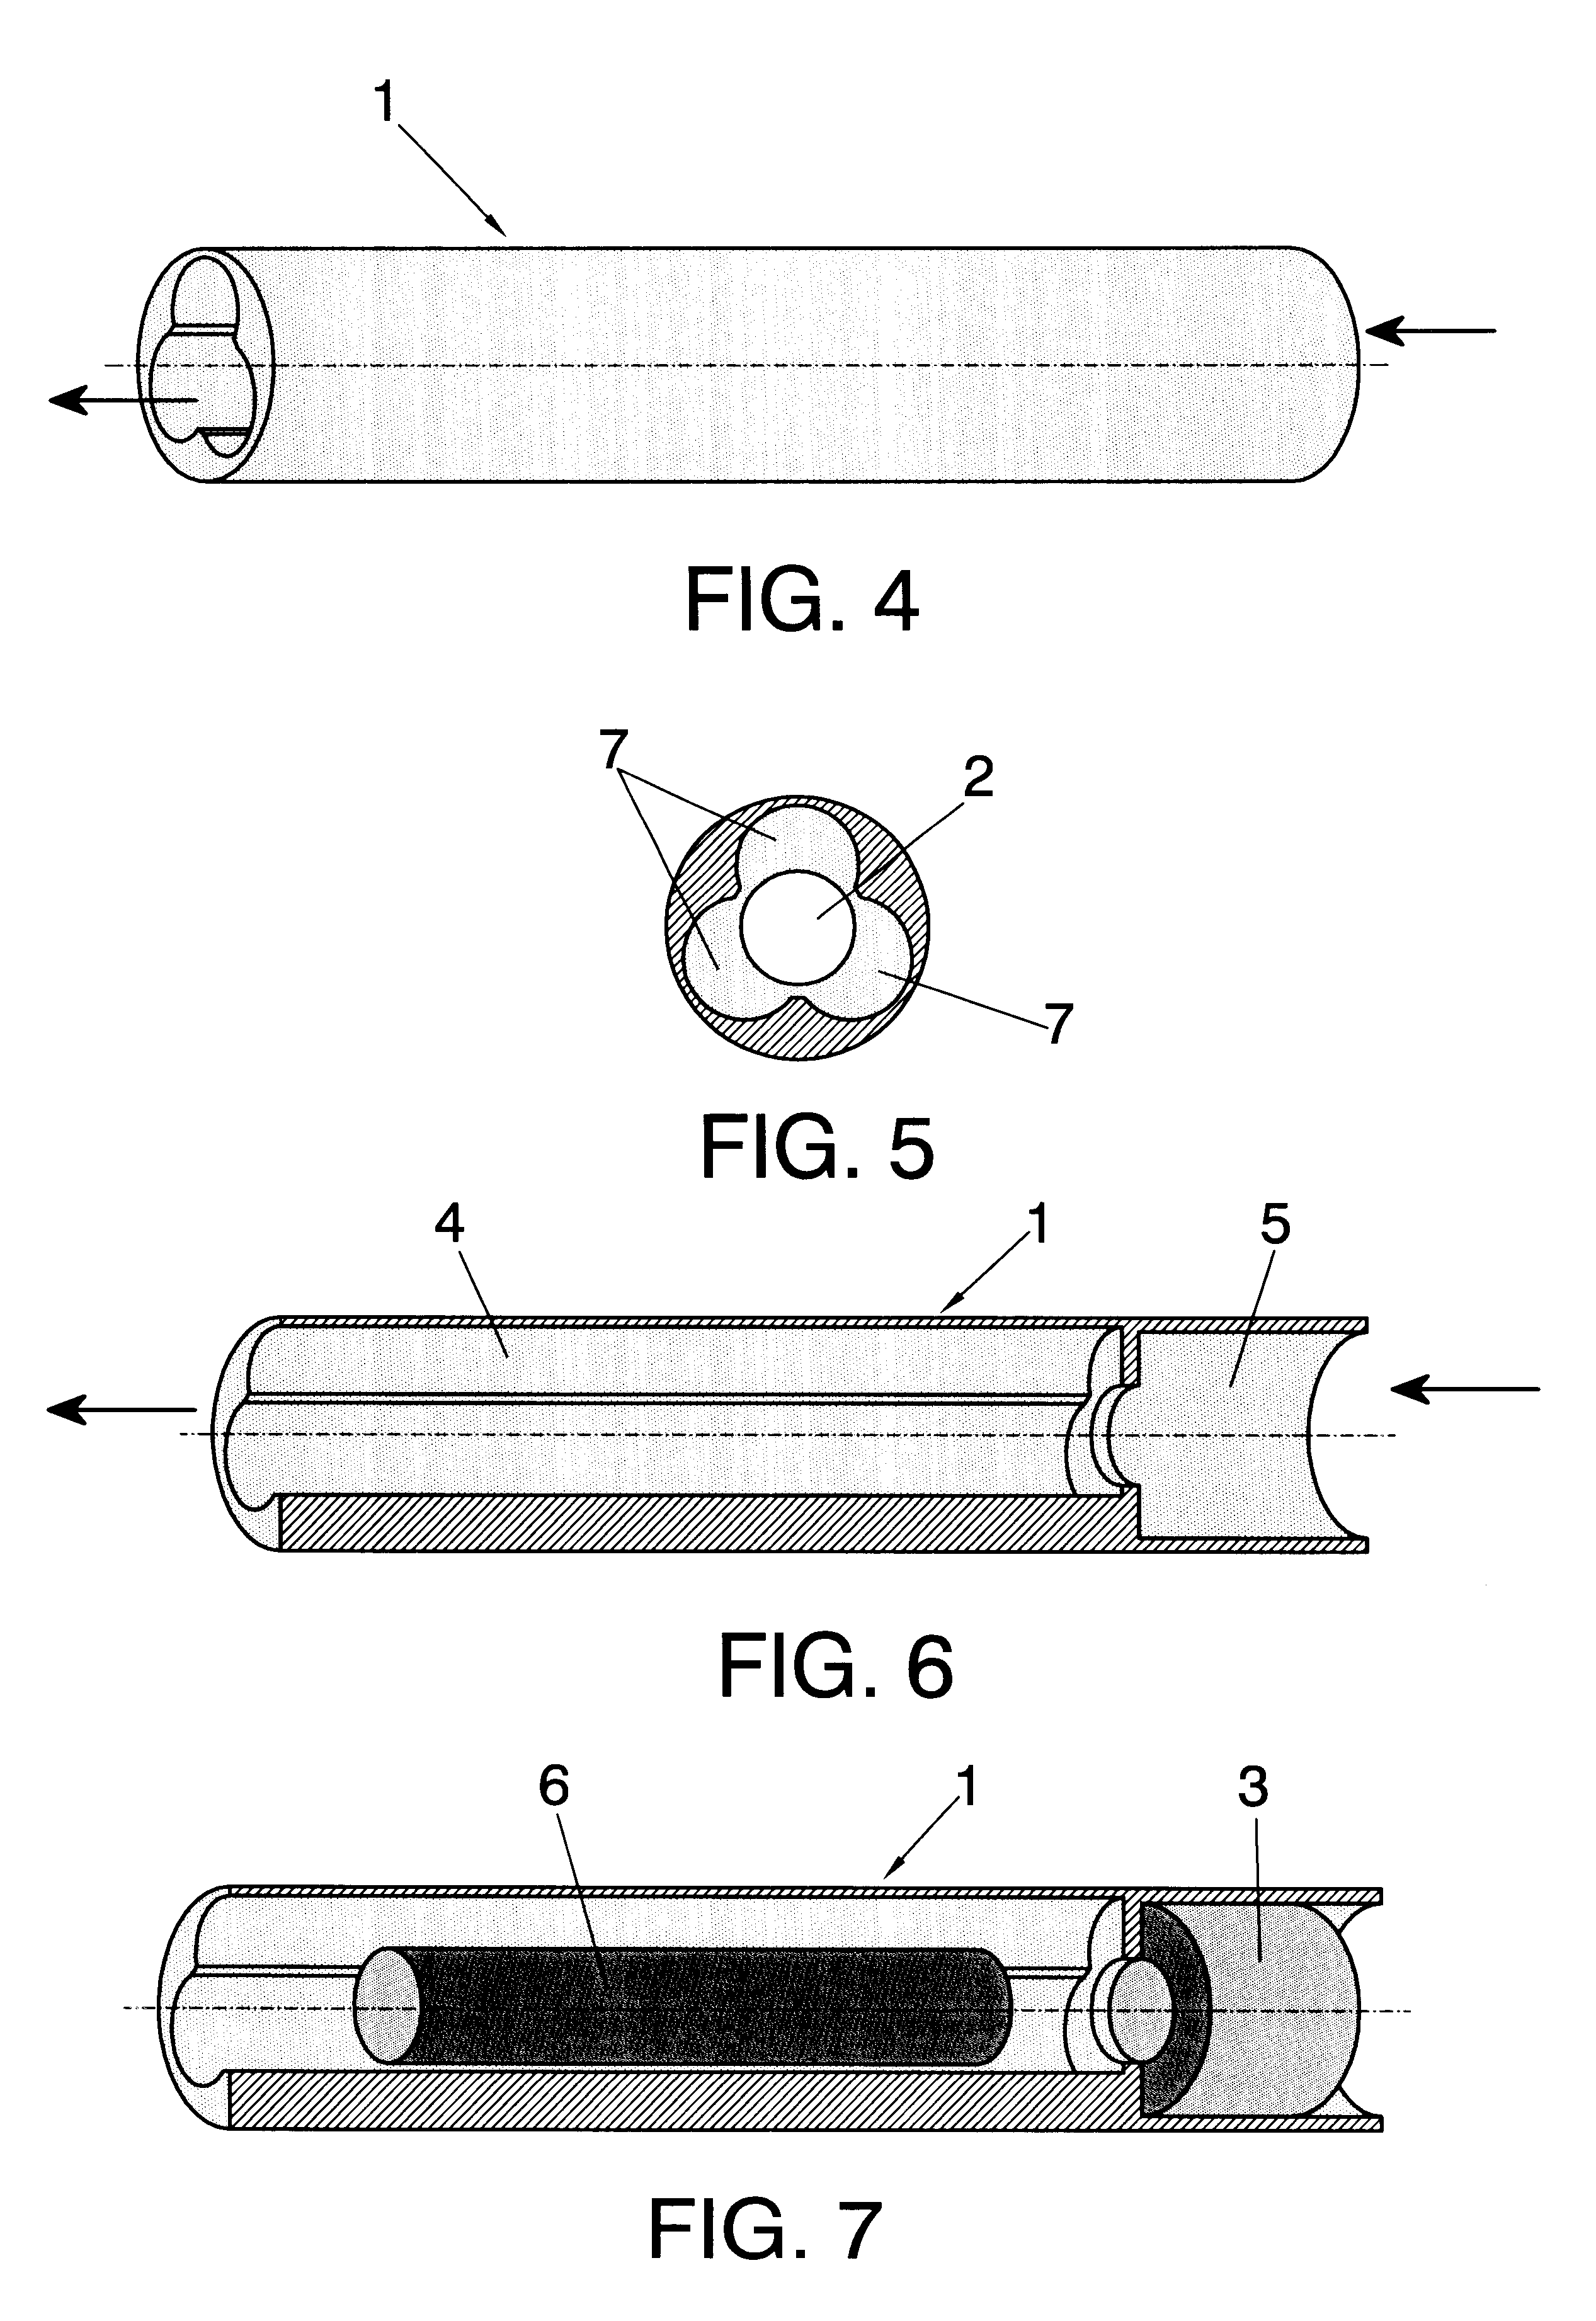 External magnetic actuation valve for intraurethral artificial urinary sphincter